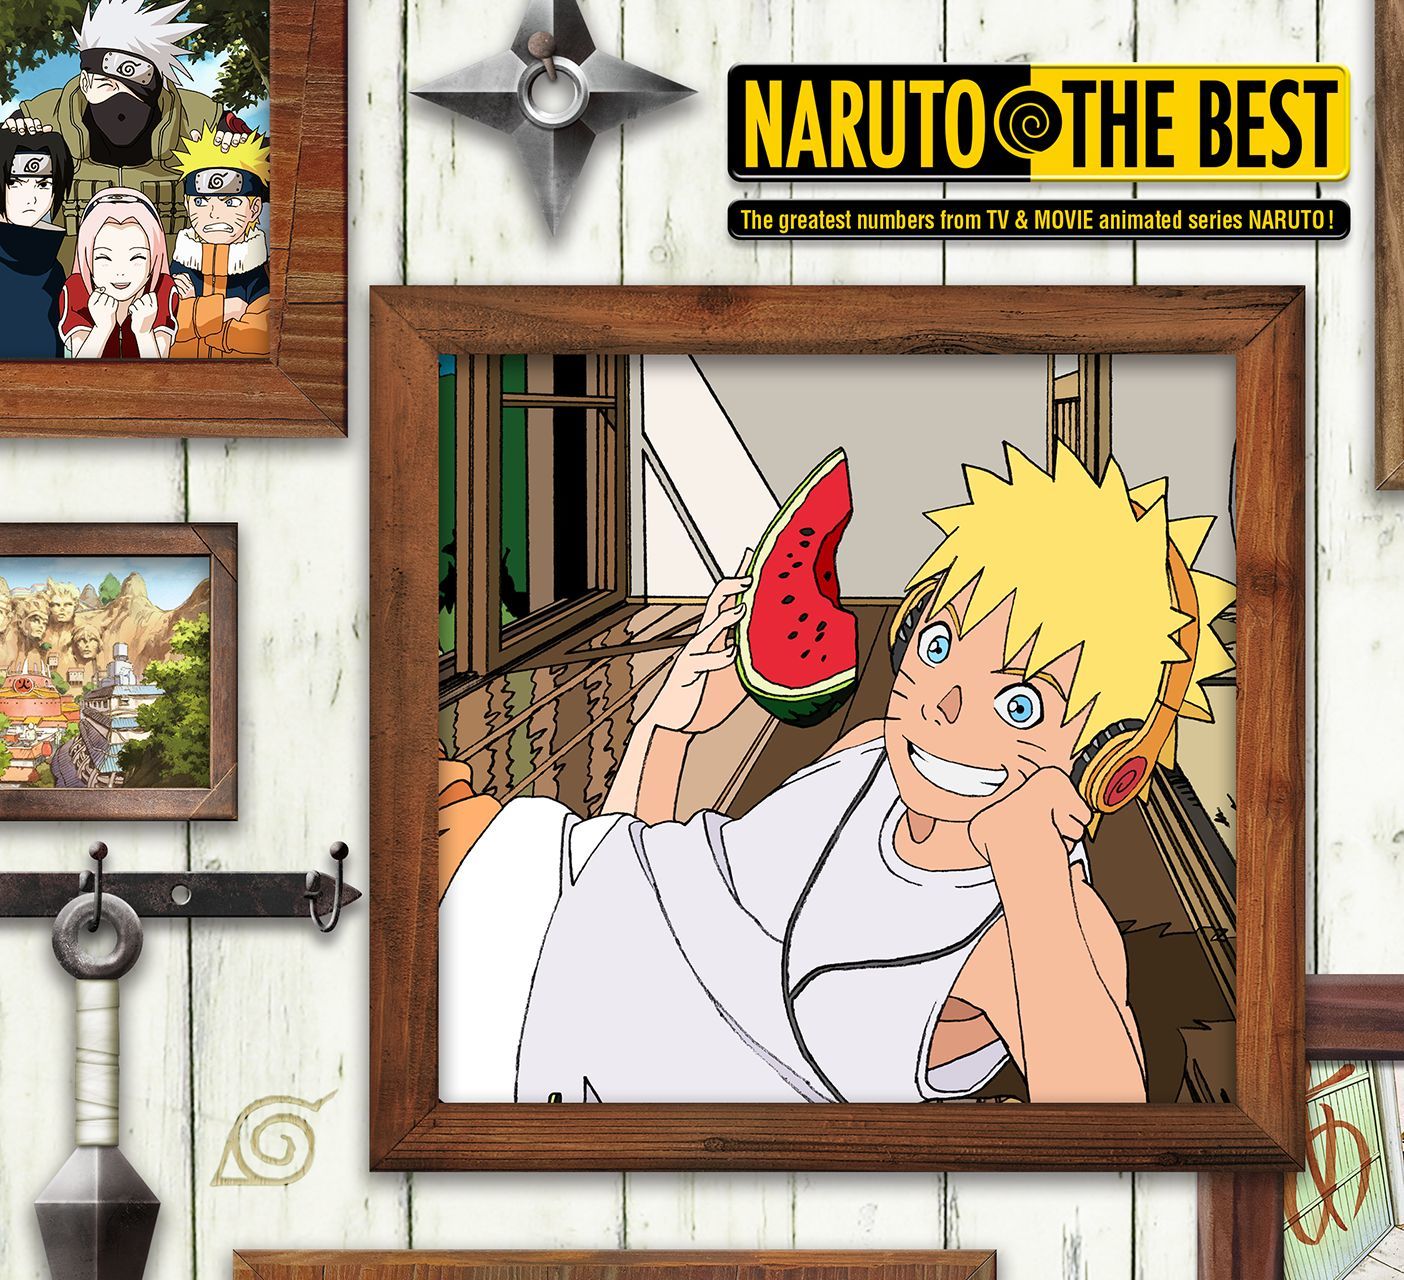 NARUTO THE BEST ©岸本斉史 スコット／集英社・テレビ東京・ぴえろ